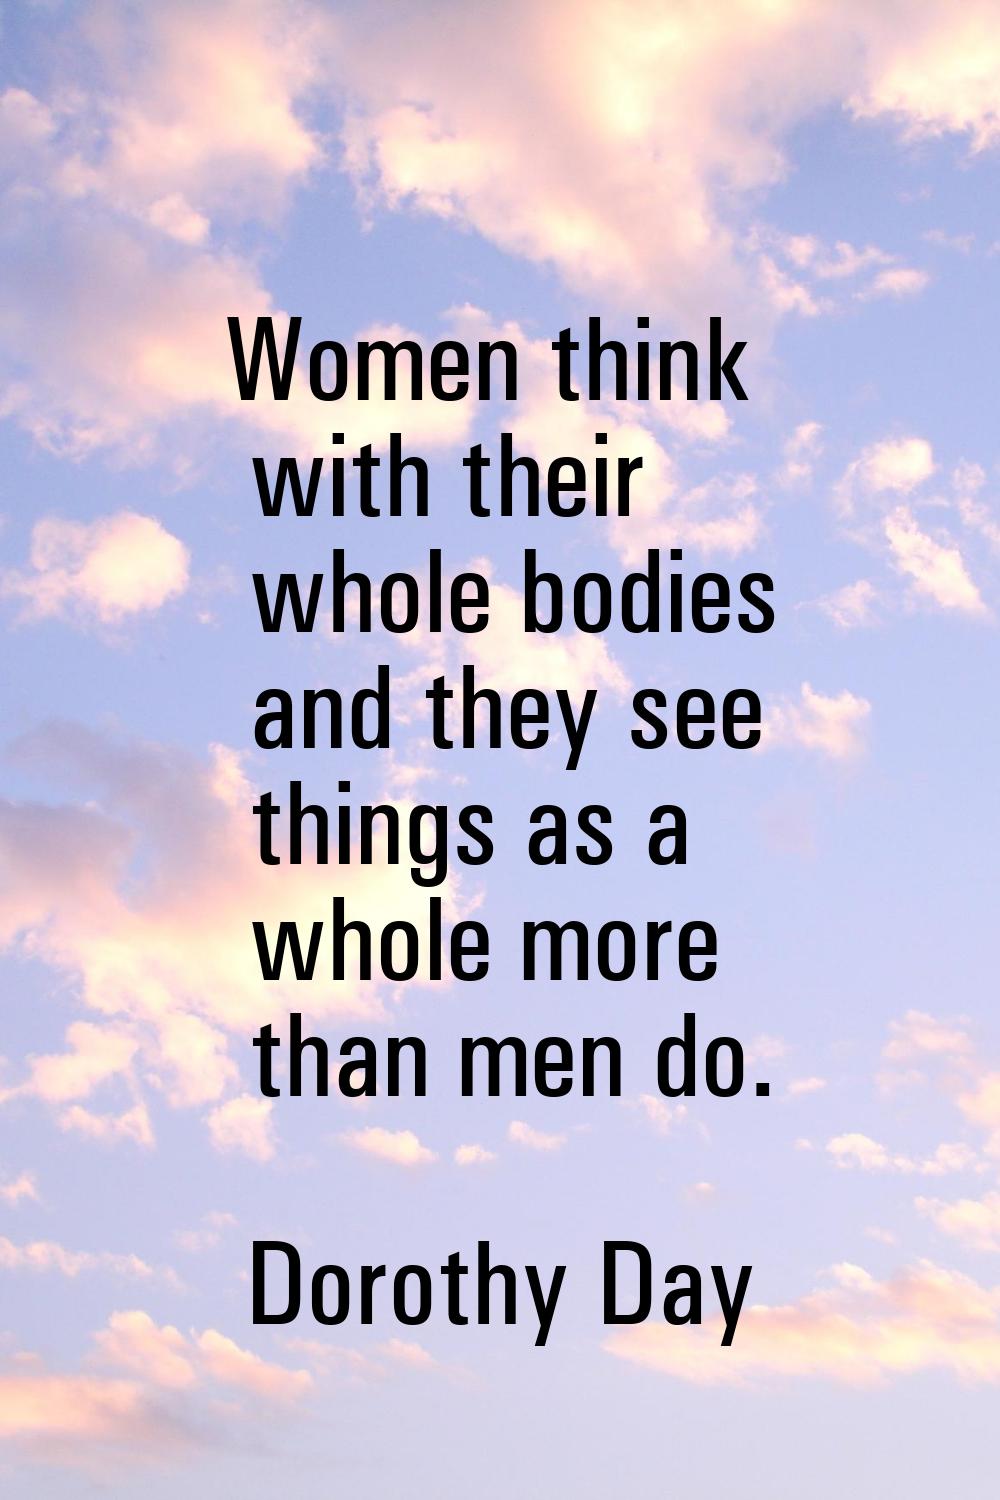 Women think with their whole bodies and they see things as a whole more than men do.